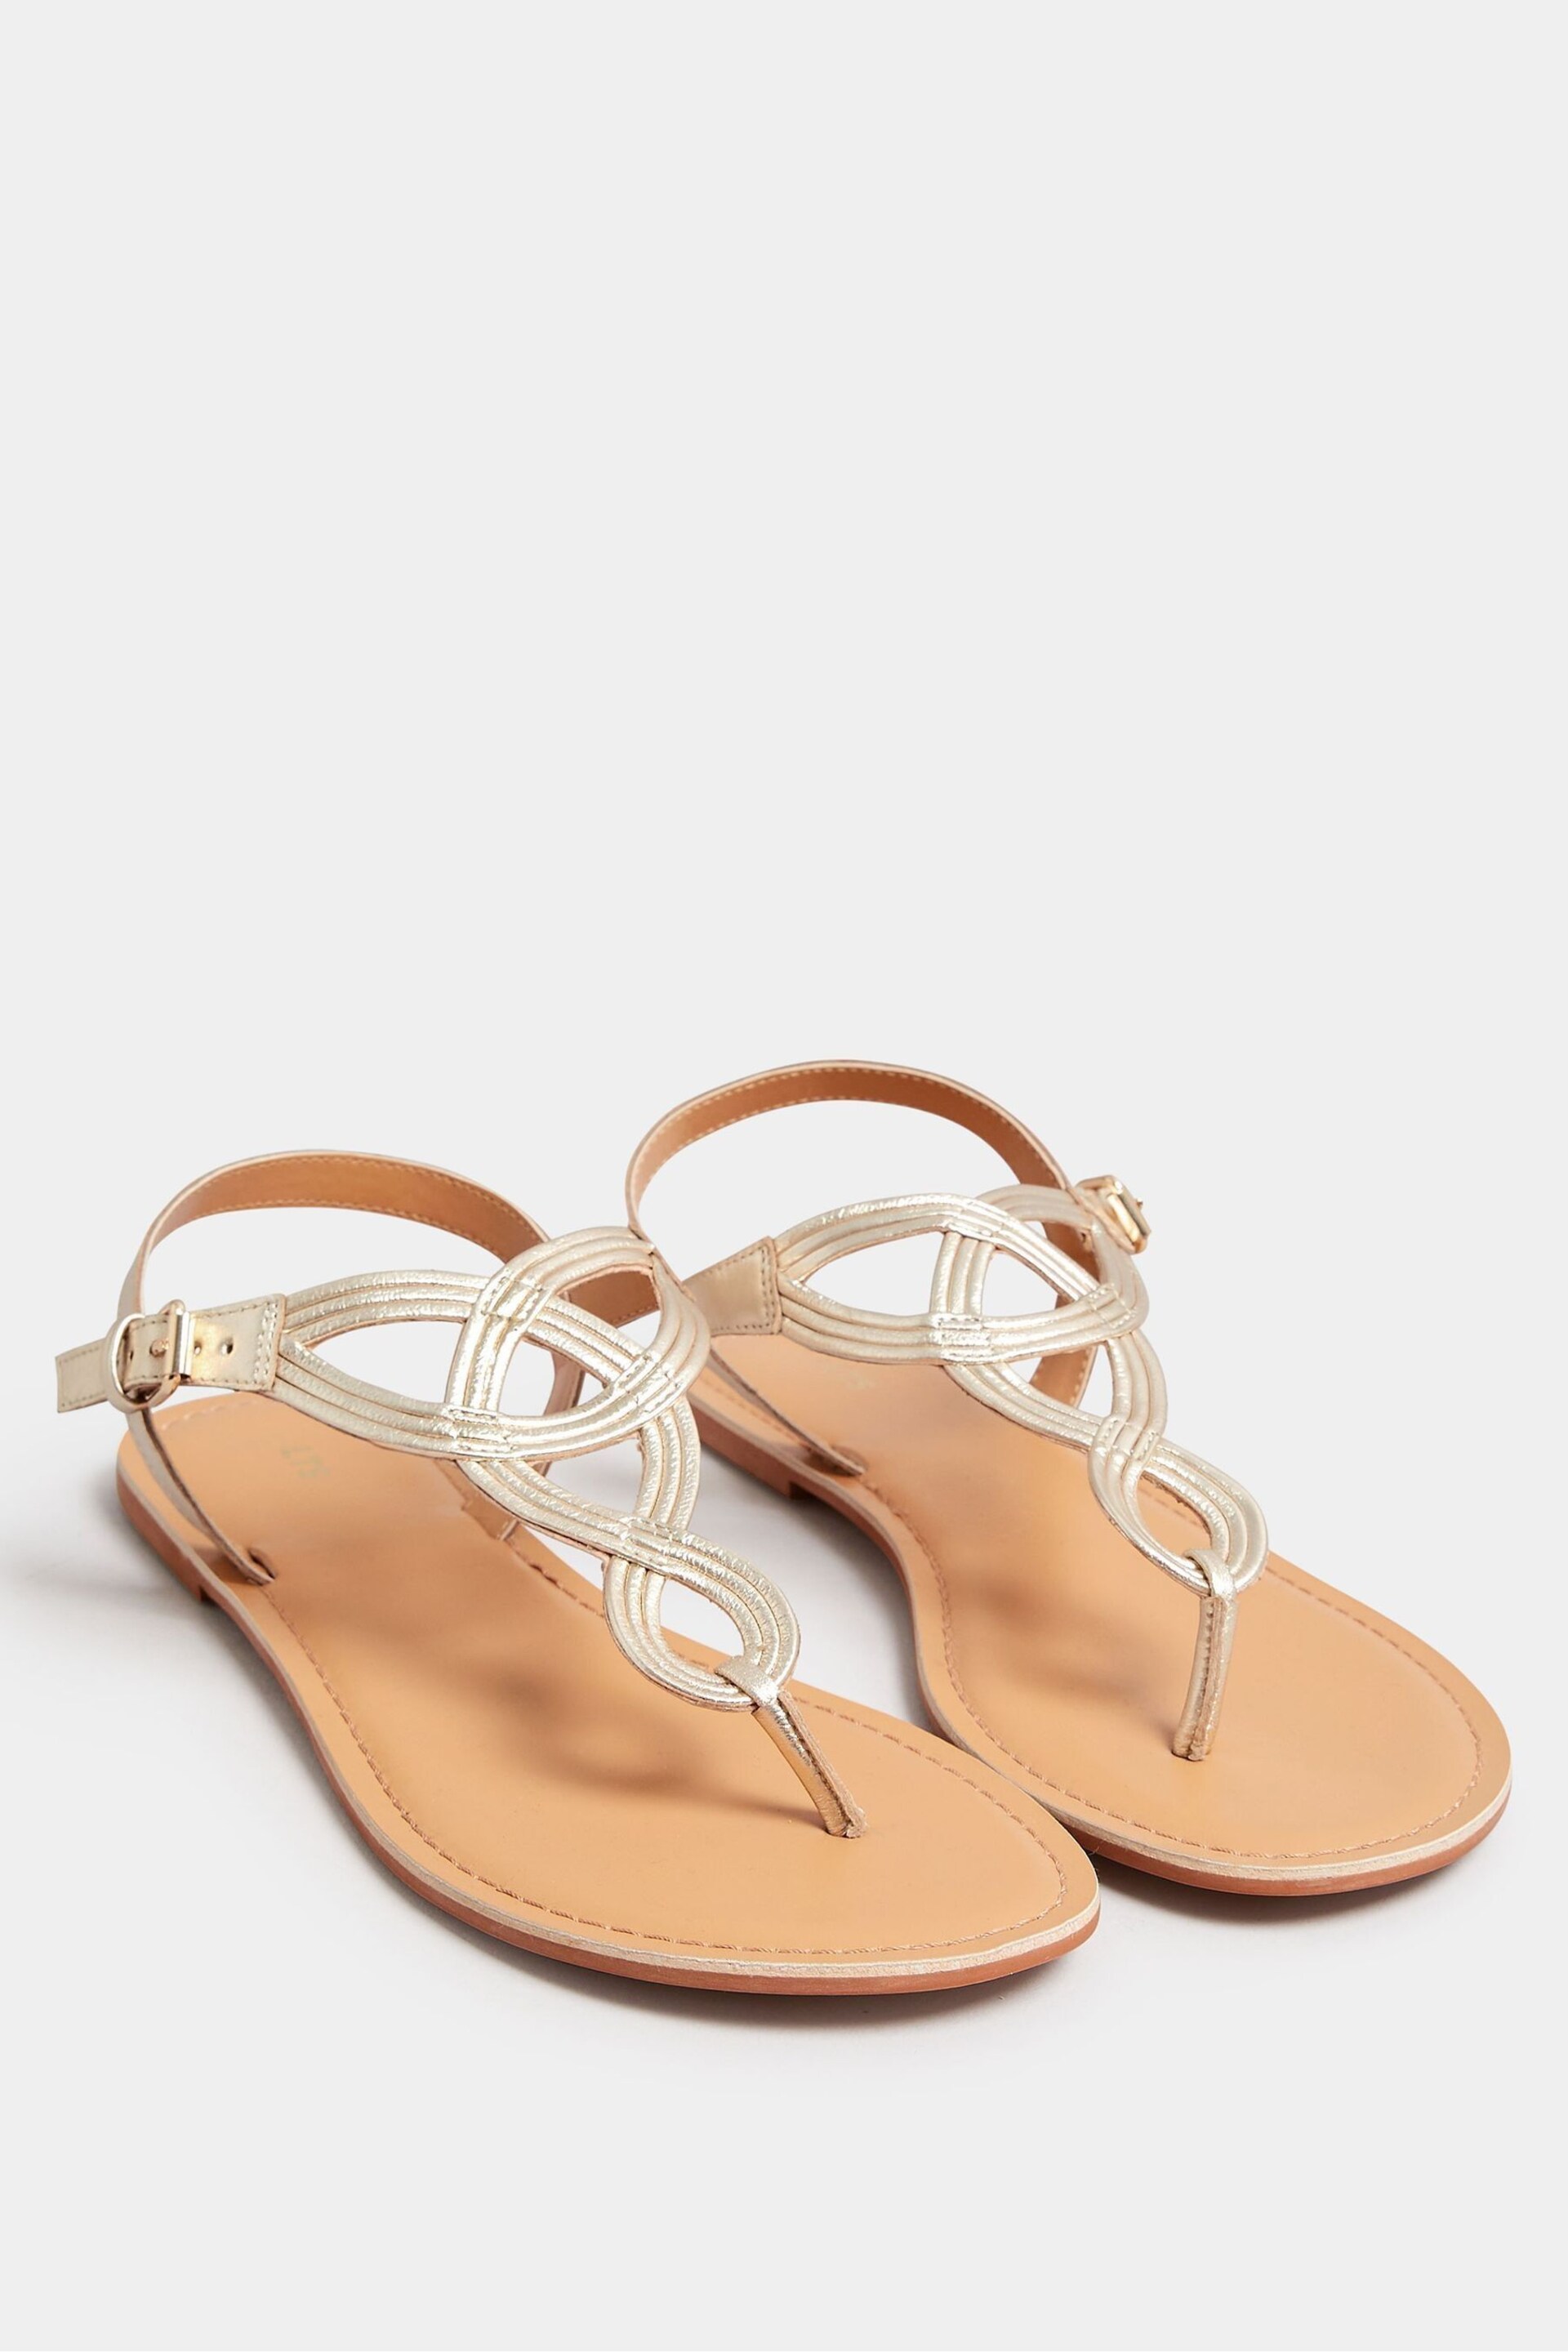 Long Tall Sally Gold LTS Gold Leather Swirl Toe Post Flat Sandals In Standard Fit - Image 1 of 3